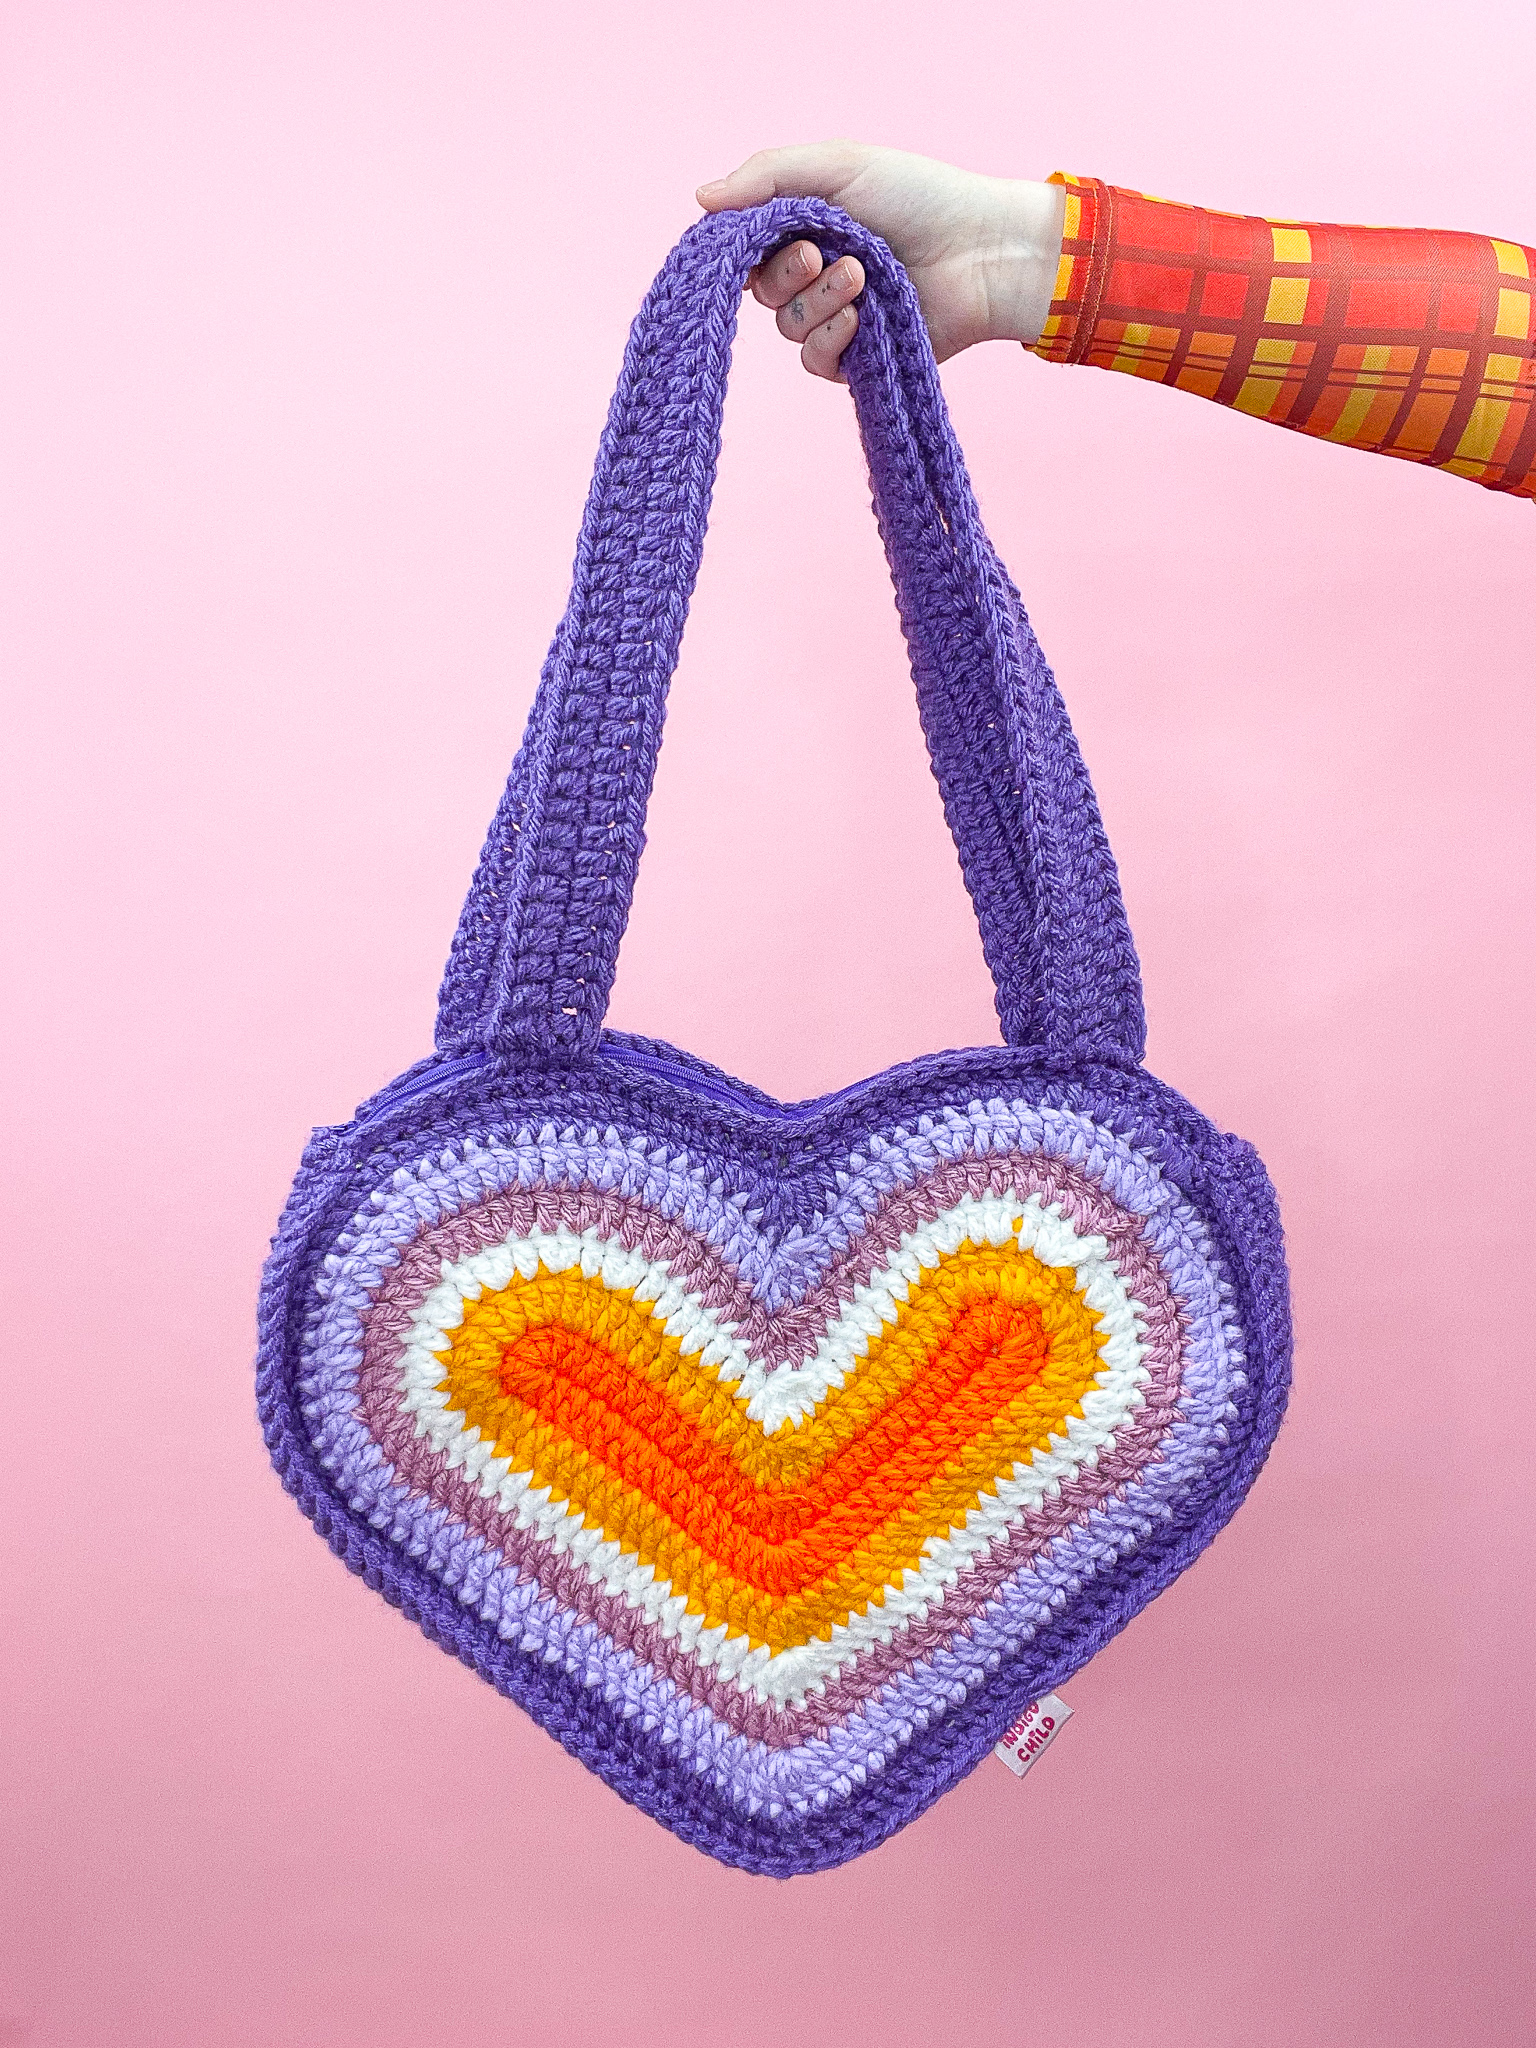 a hand holding a knitted heart shaped bag